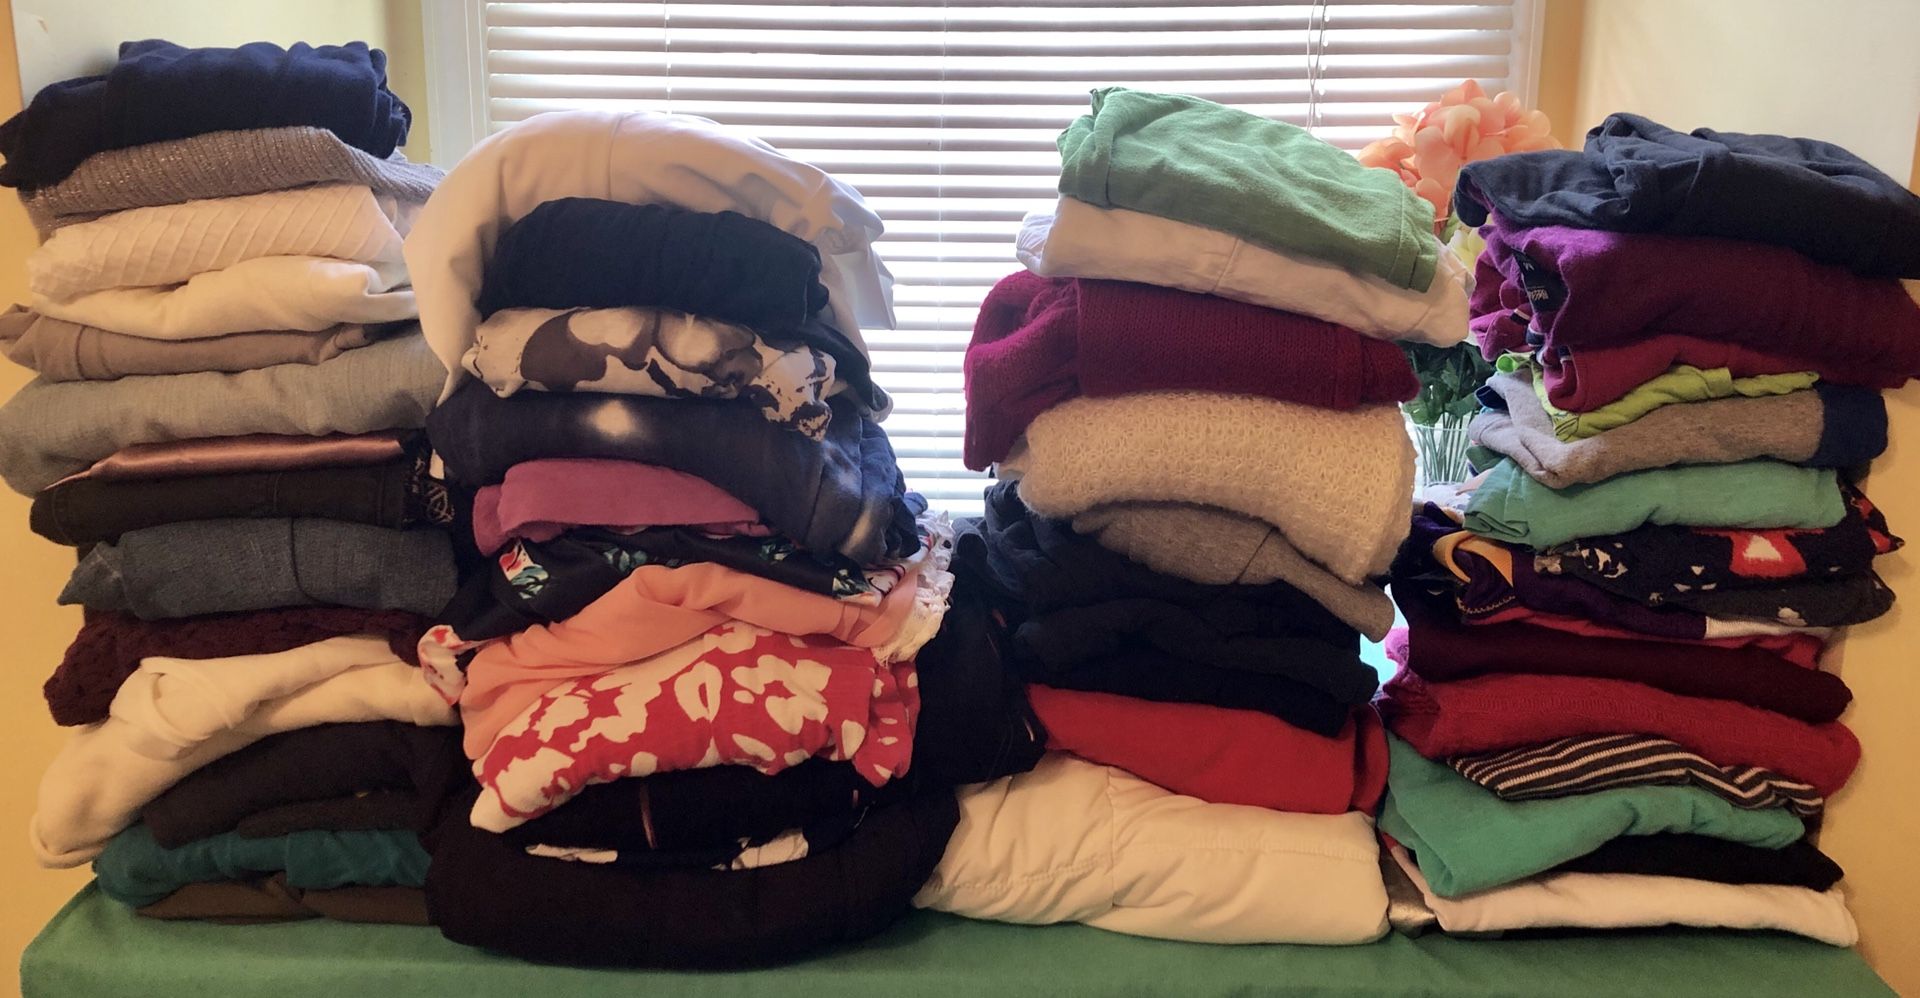 Young women’s clothing lot $45 for all